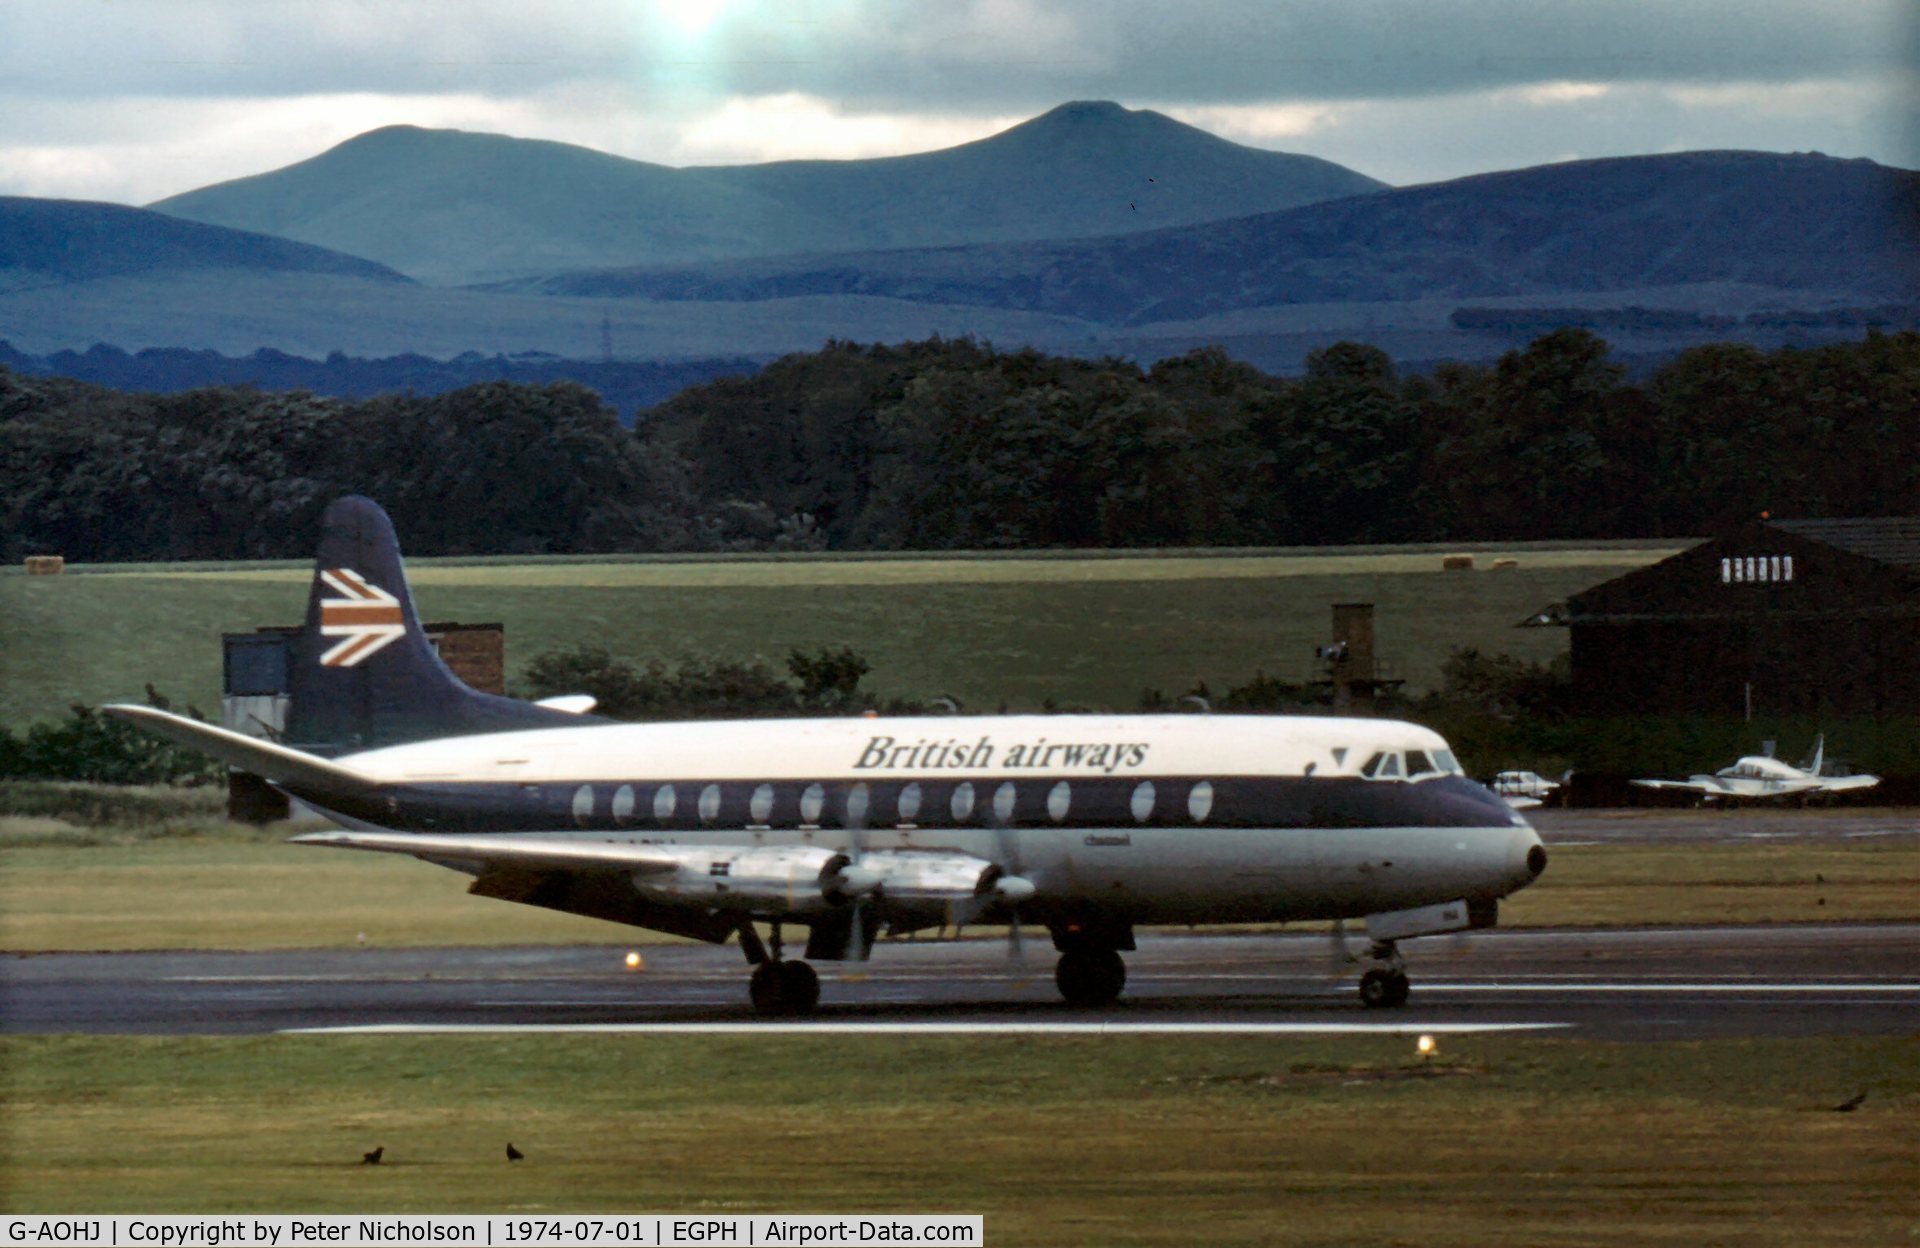 G-AOHJ, 1957 Vickers Viscount 802 C/N 159, Viscount 802 of British Airways Channel Division at Edinburgh in the Summer of 1974.